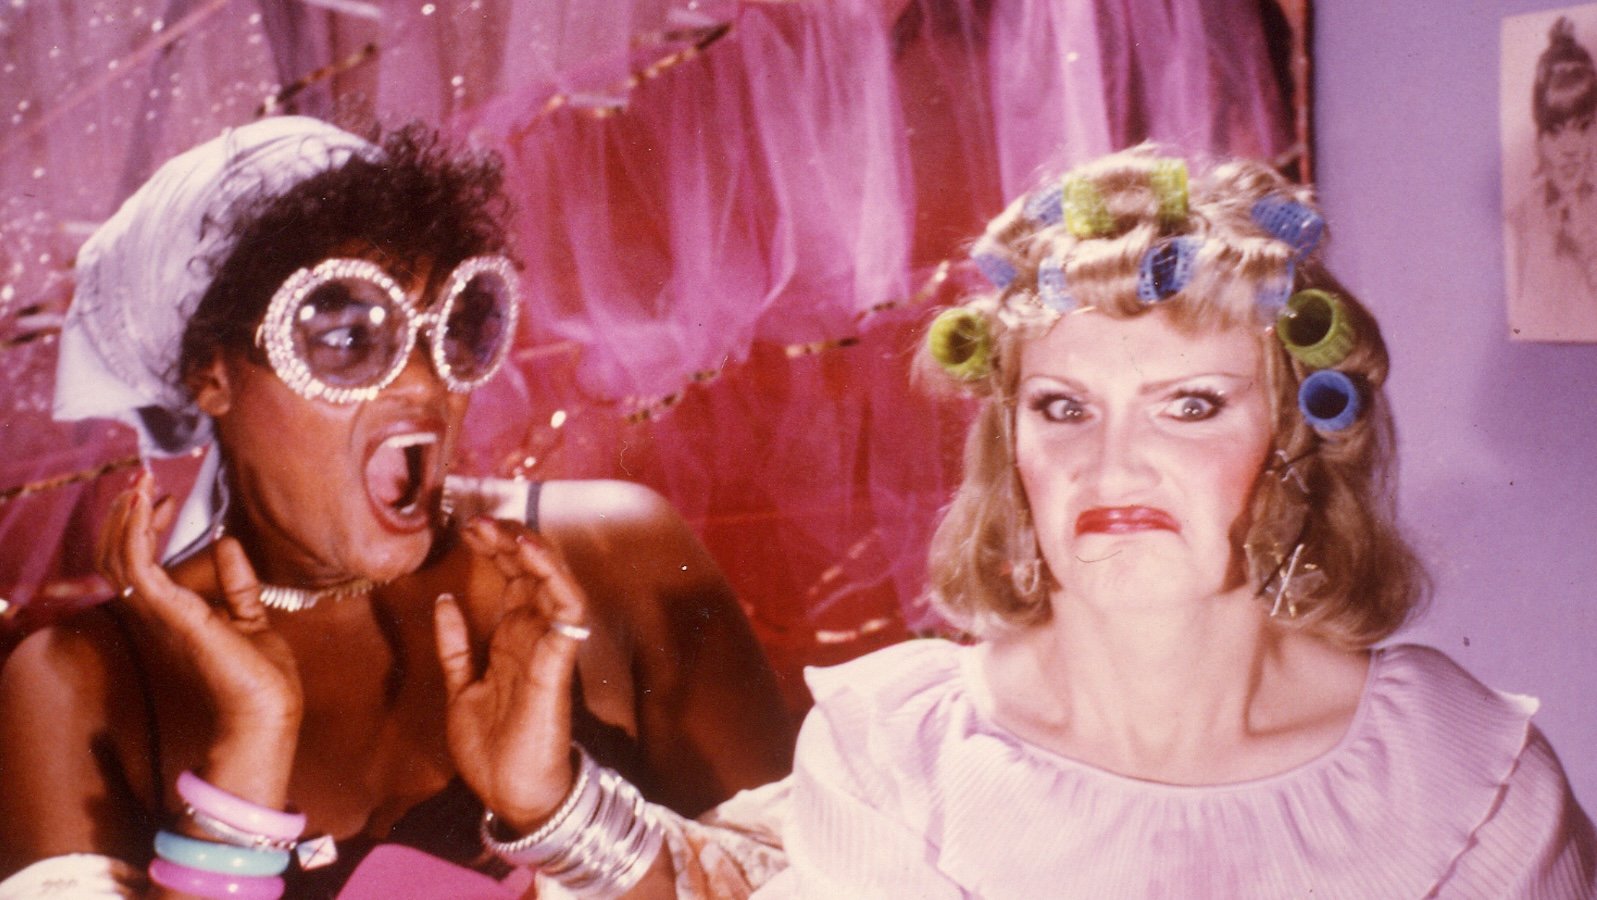 Two people against a pink, campy background: a dark haired woman with sunglasses making an outrageous shocked face with her mouth open on the right, and a blonde woman in hair rollers making a goofy face with pursed lips on the right